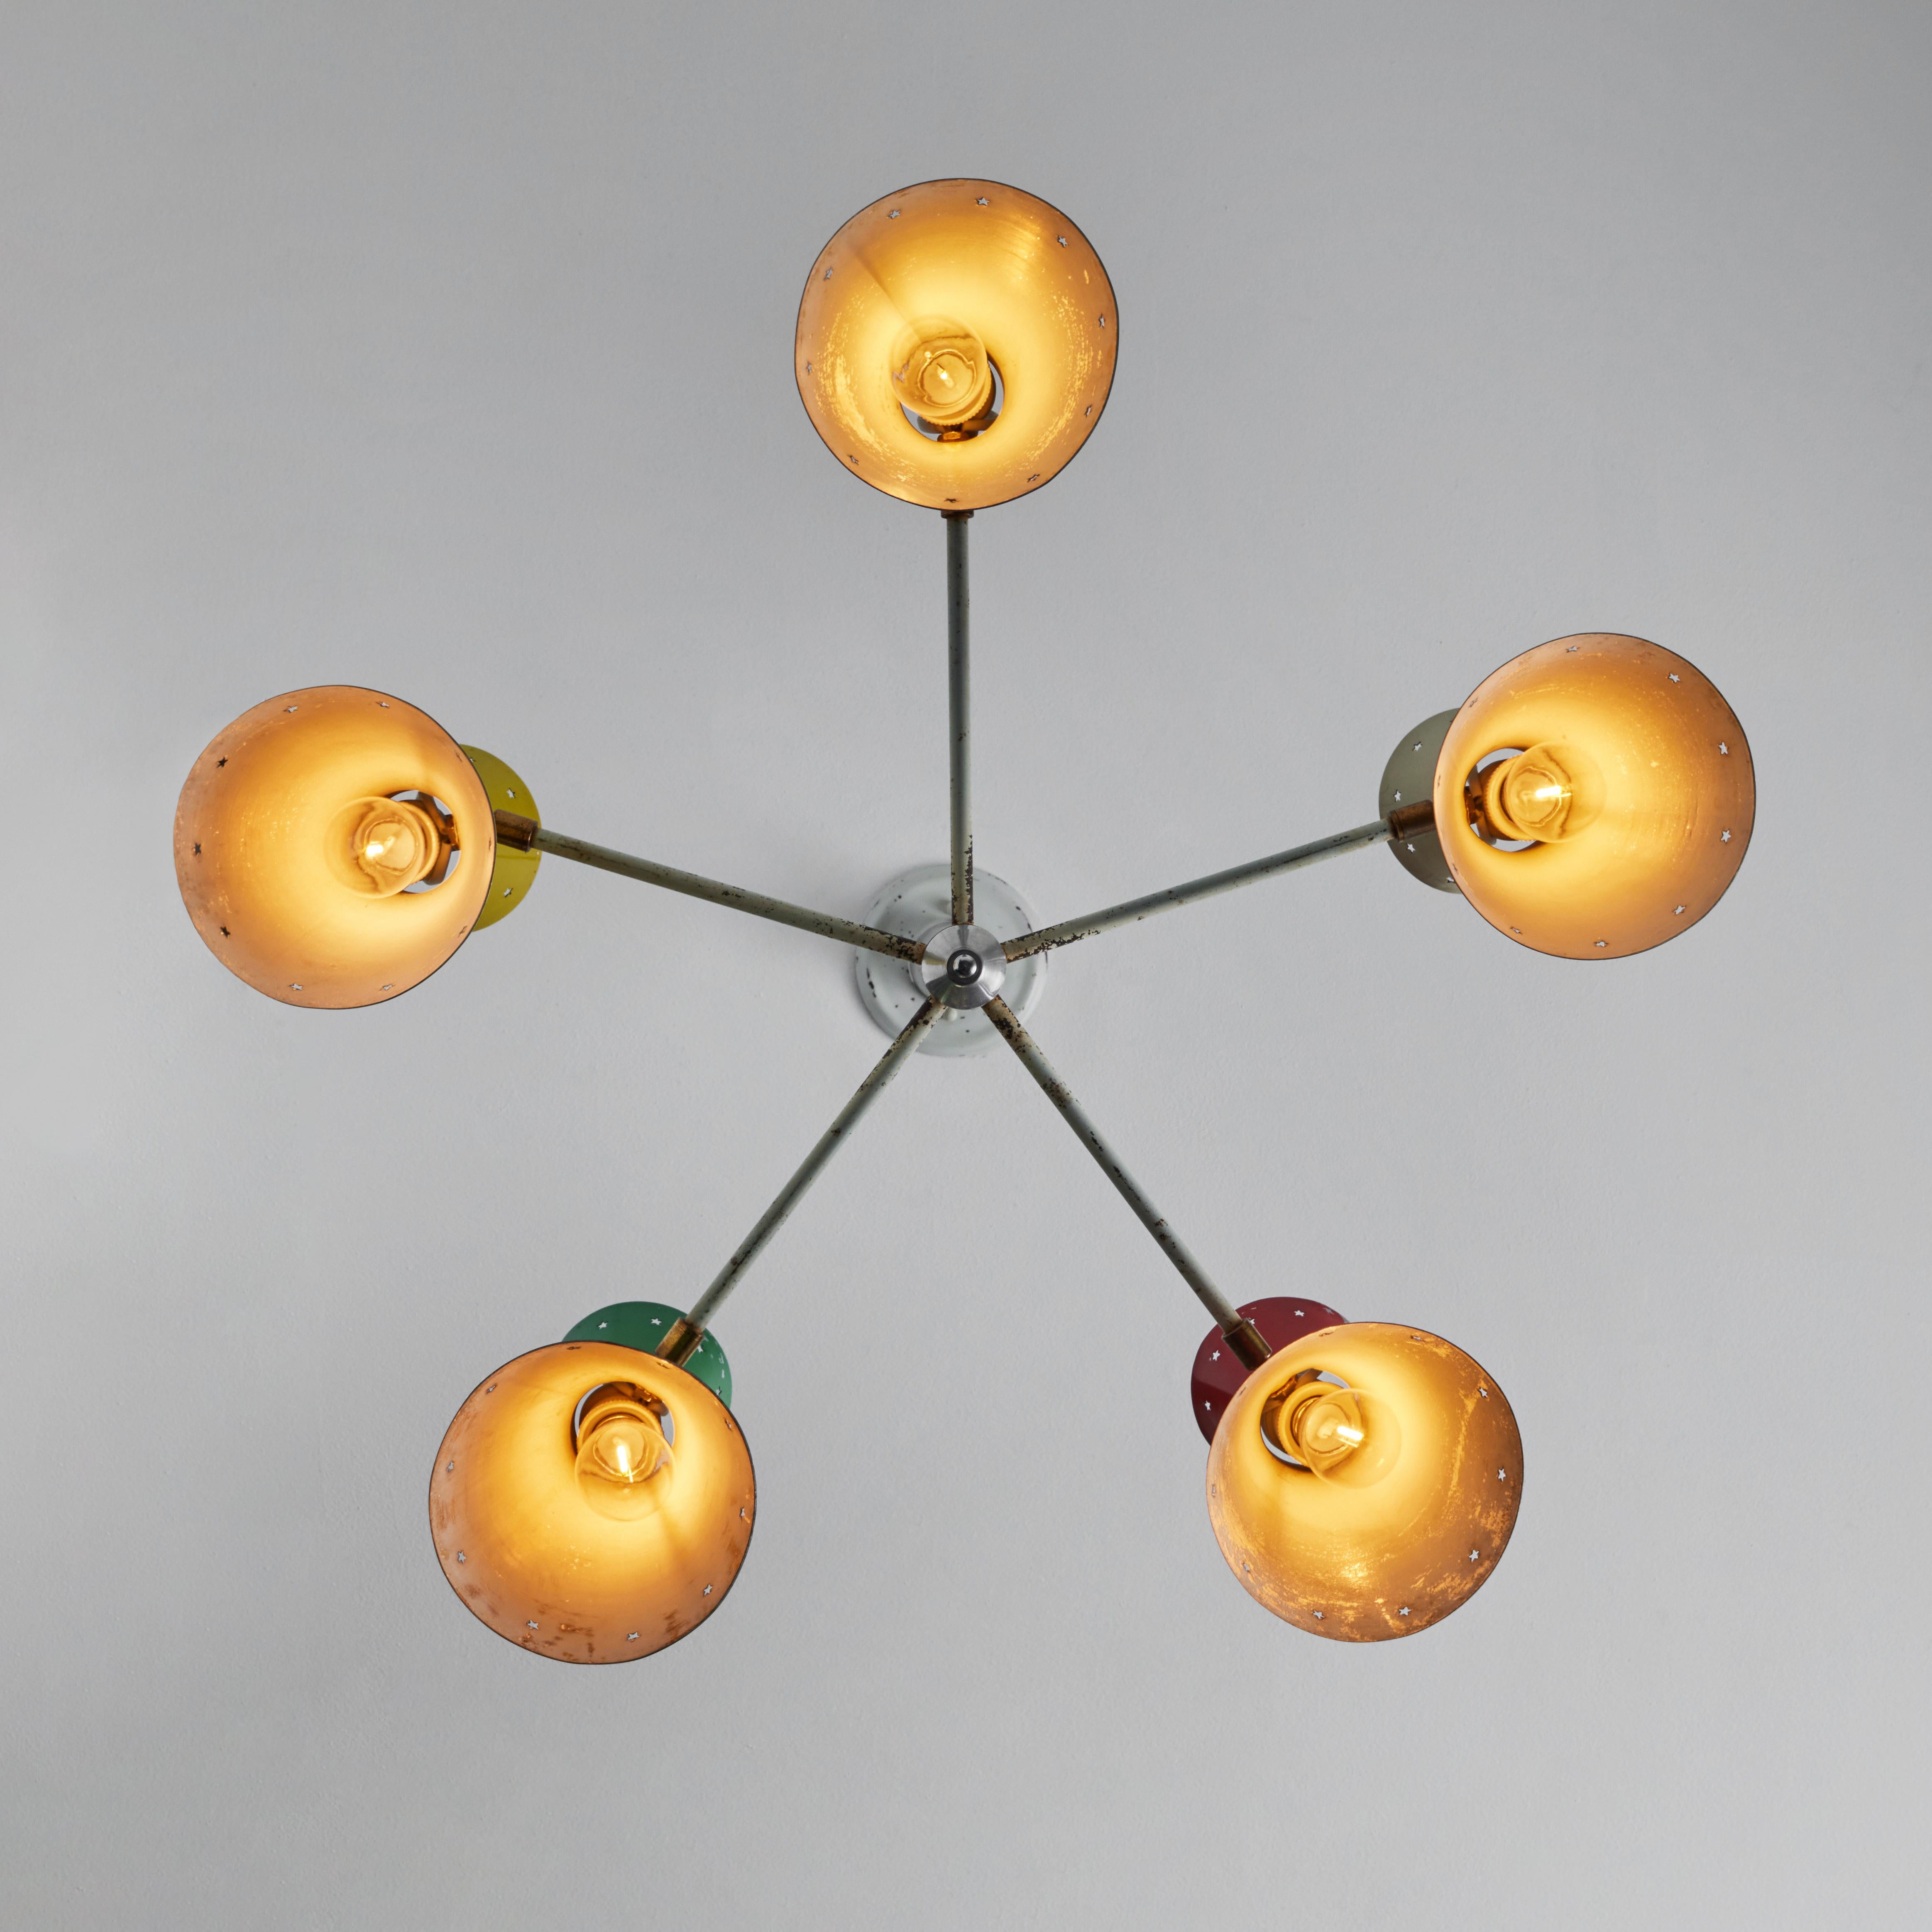 Rare 1950s Robert Mathieu 5-Shade Multi Color Chandelier For Sale 3